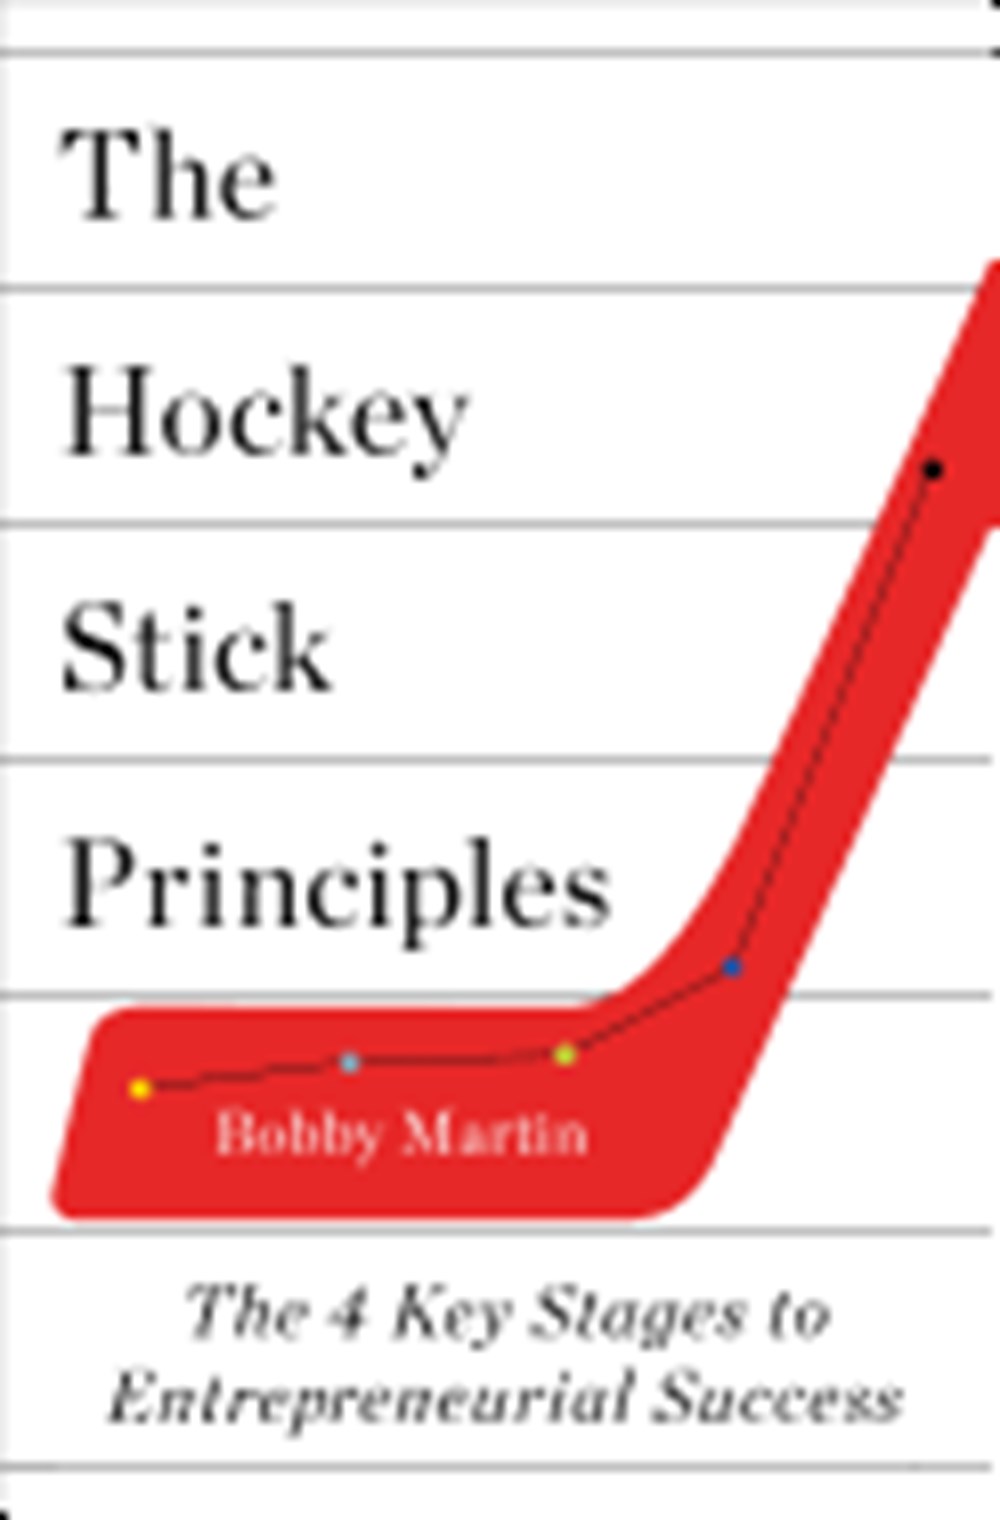 Hockey Stick Principles The 4 Key Stages to Entrepreneurial Success